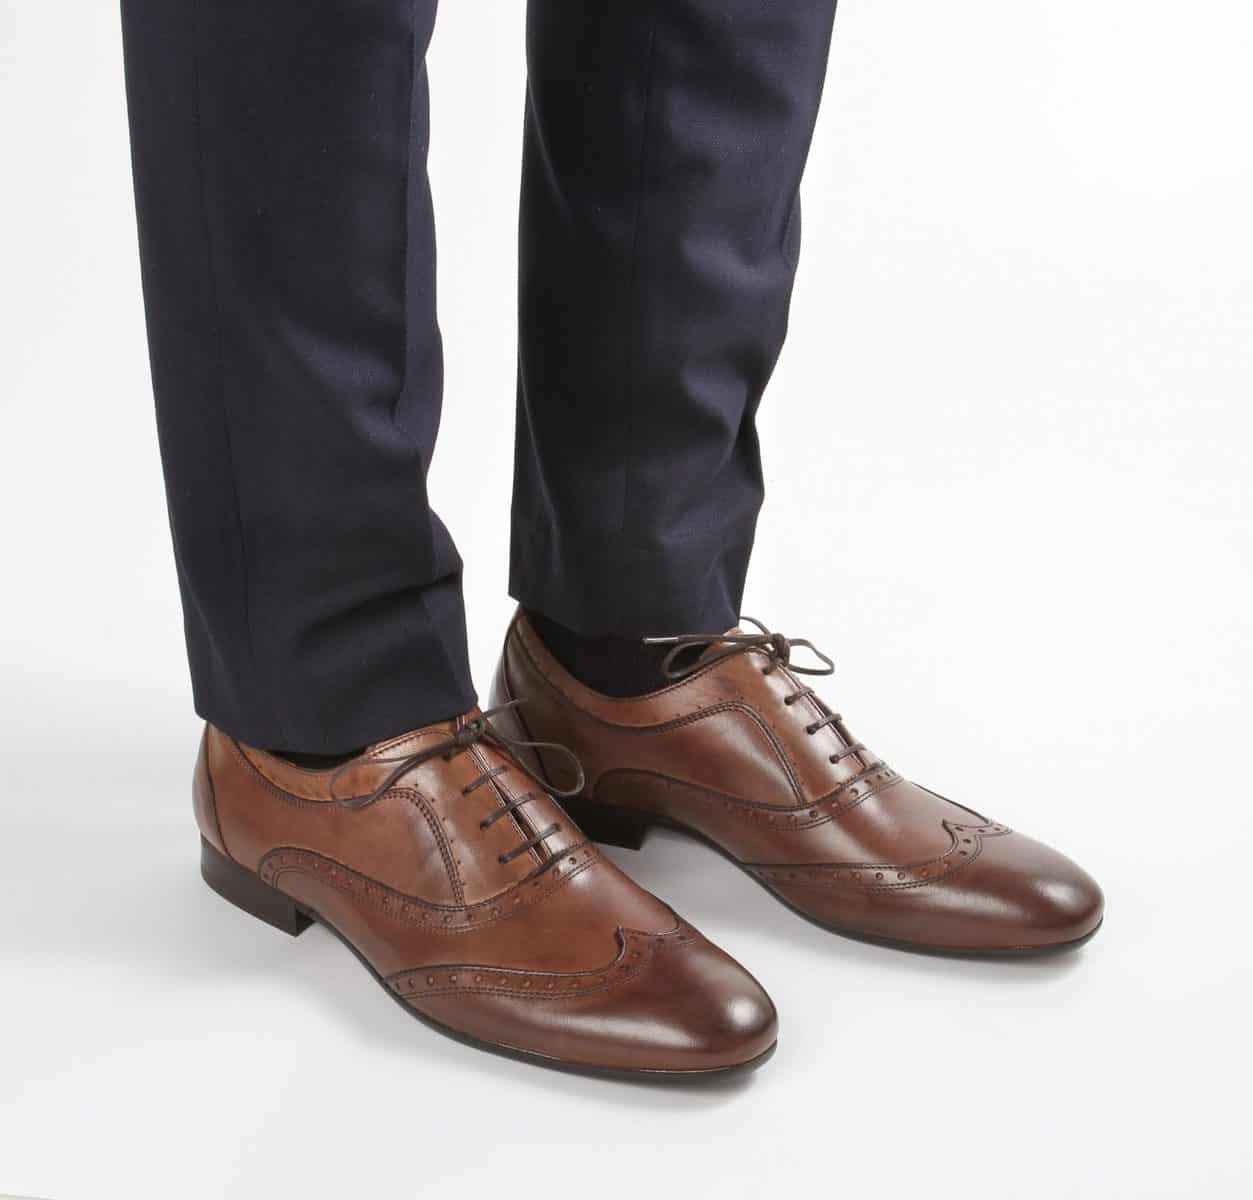 shoes to wear with black pants